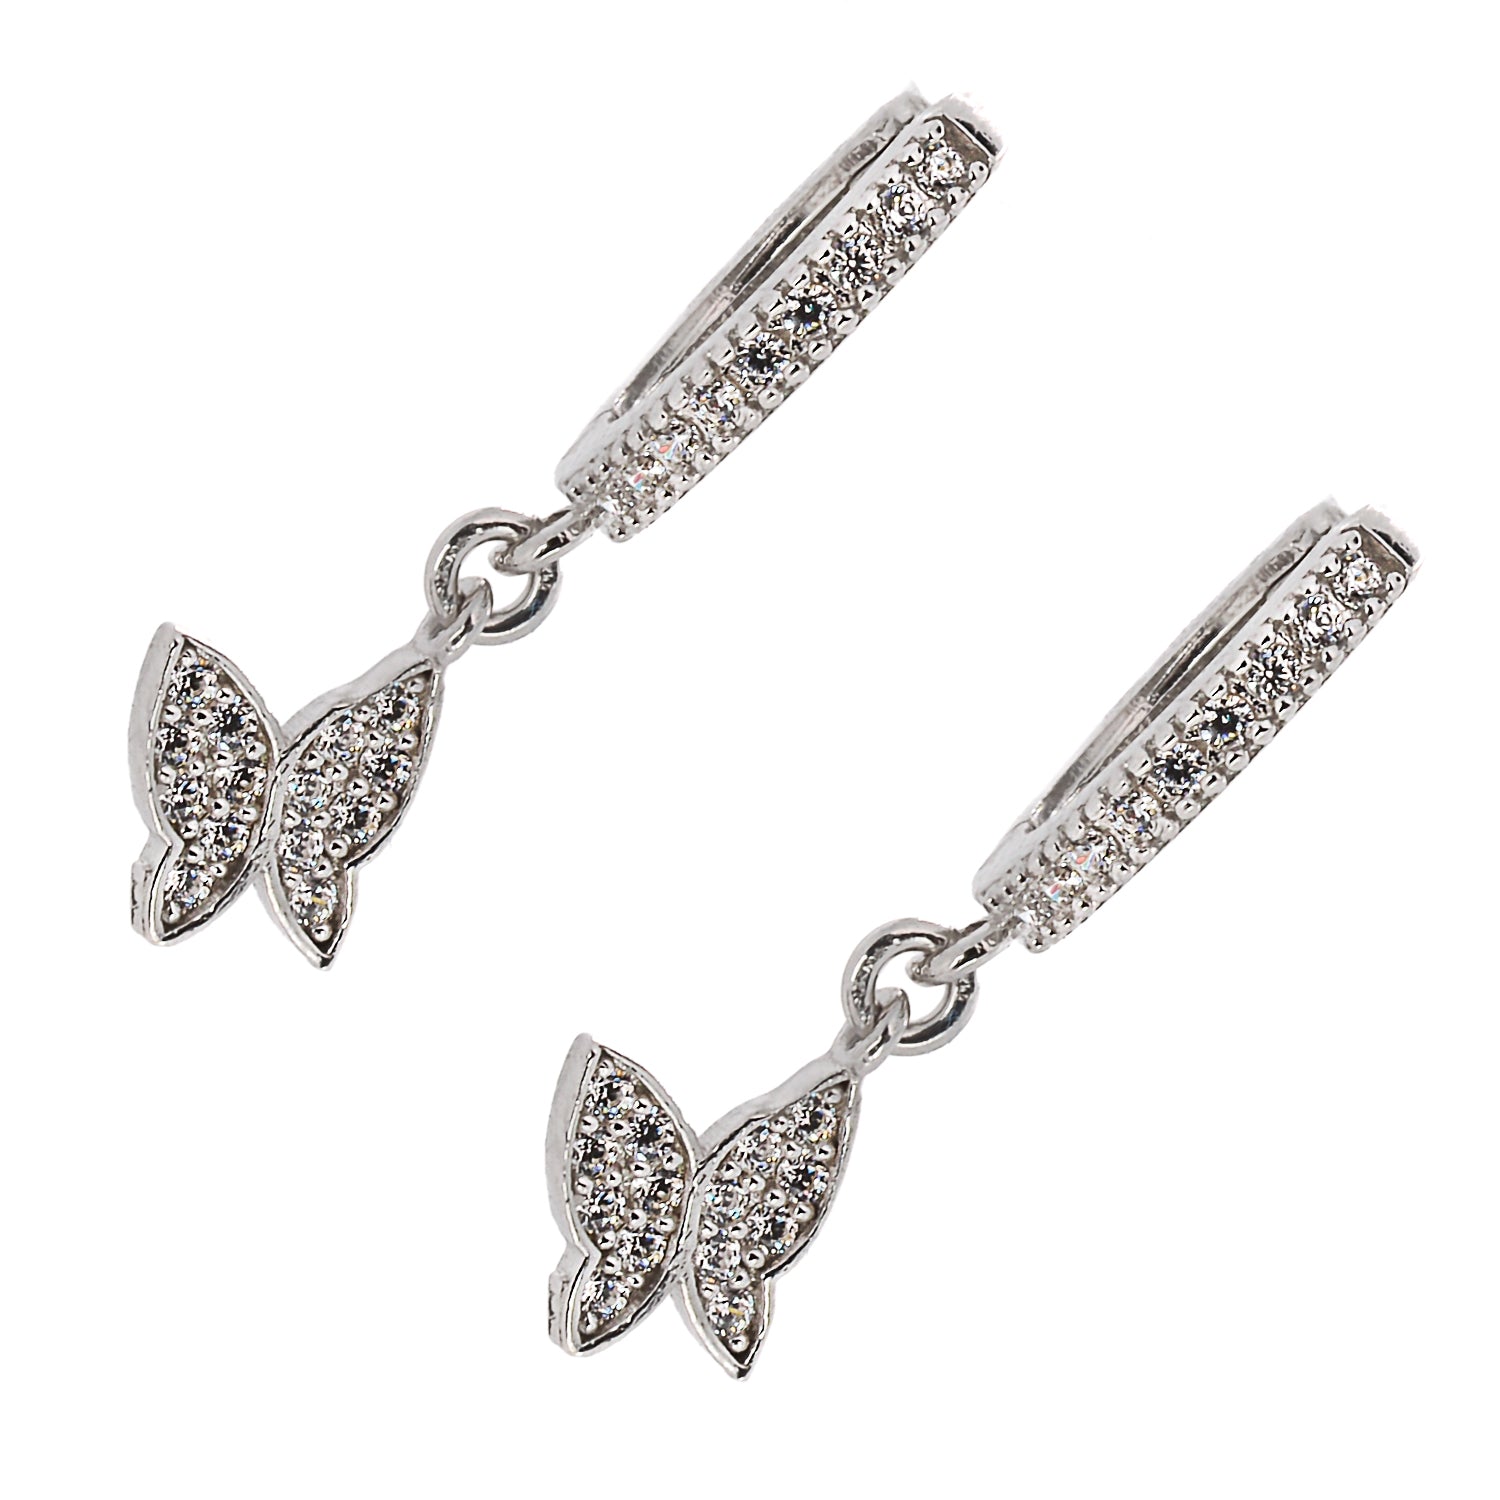 Dazzling Silver Sparkly Butterfly Earrings crafted with meticulous attention to detail